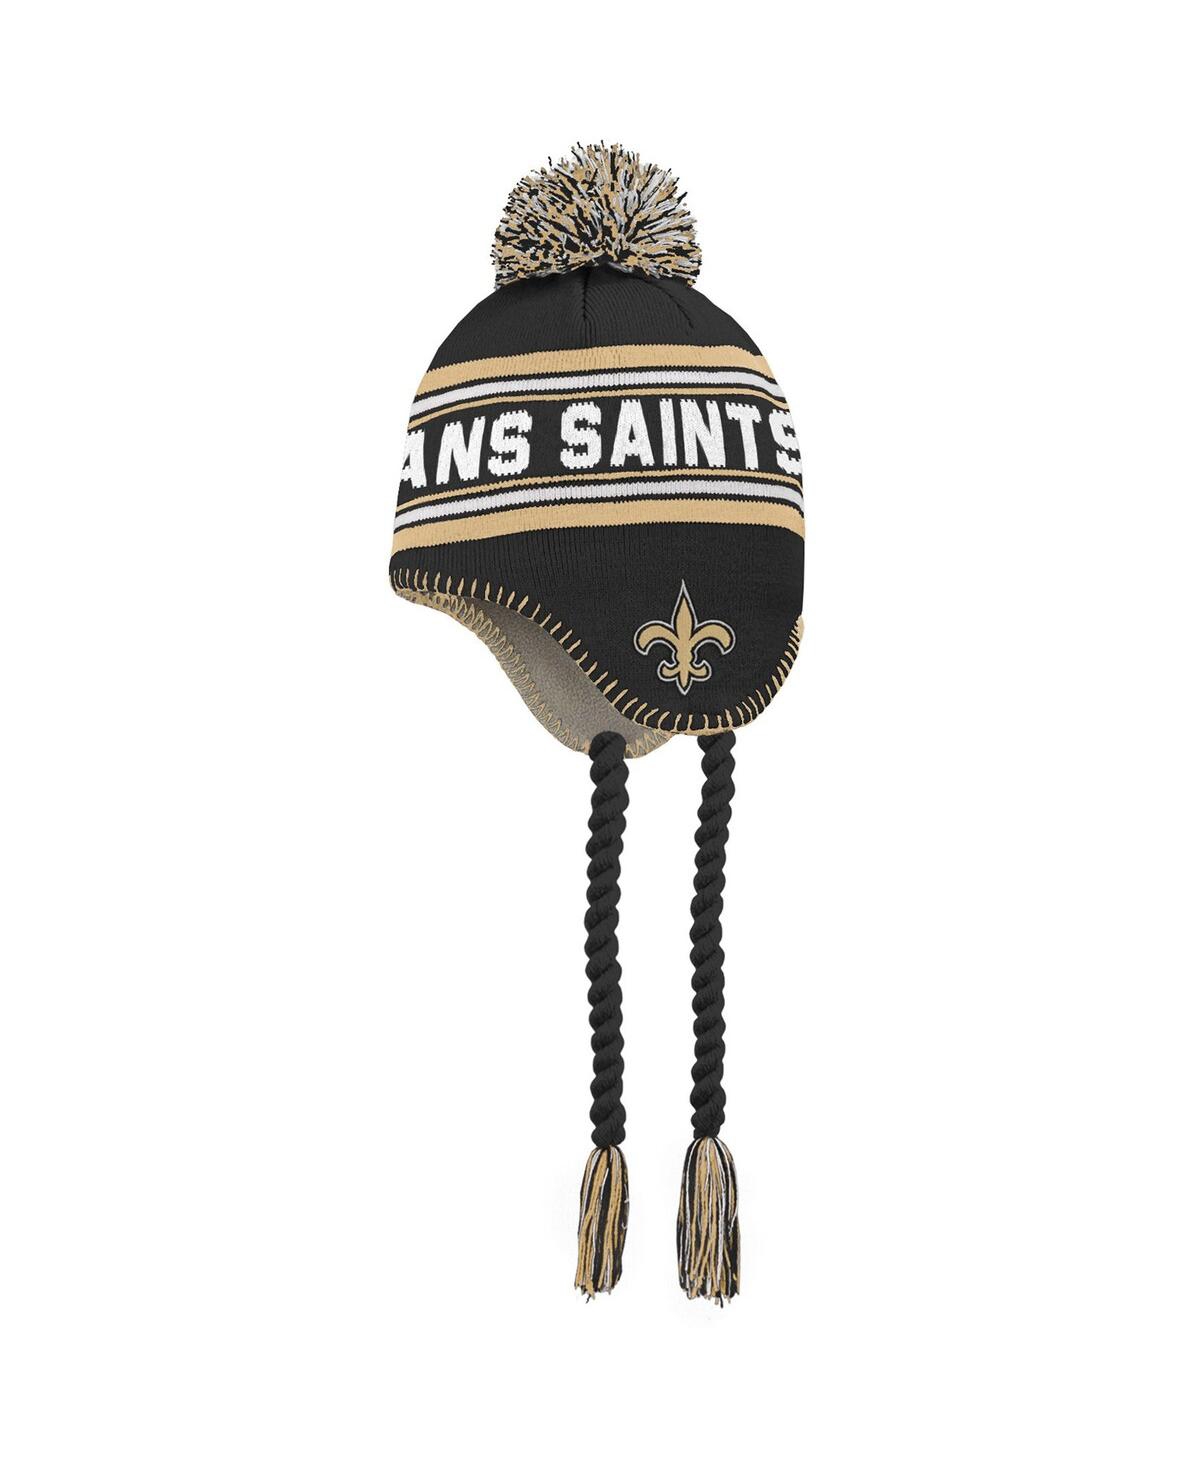 Outerstuff Babies' Preschool Boys And Girls Black And Gold New Orleans Saints Jacquard Tassel Knit Hat With Pom In Black,gold